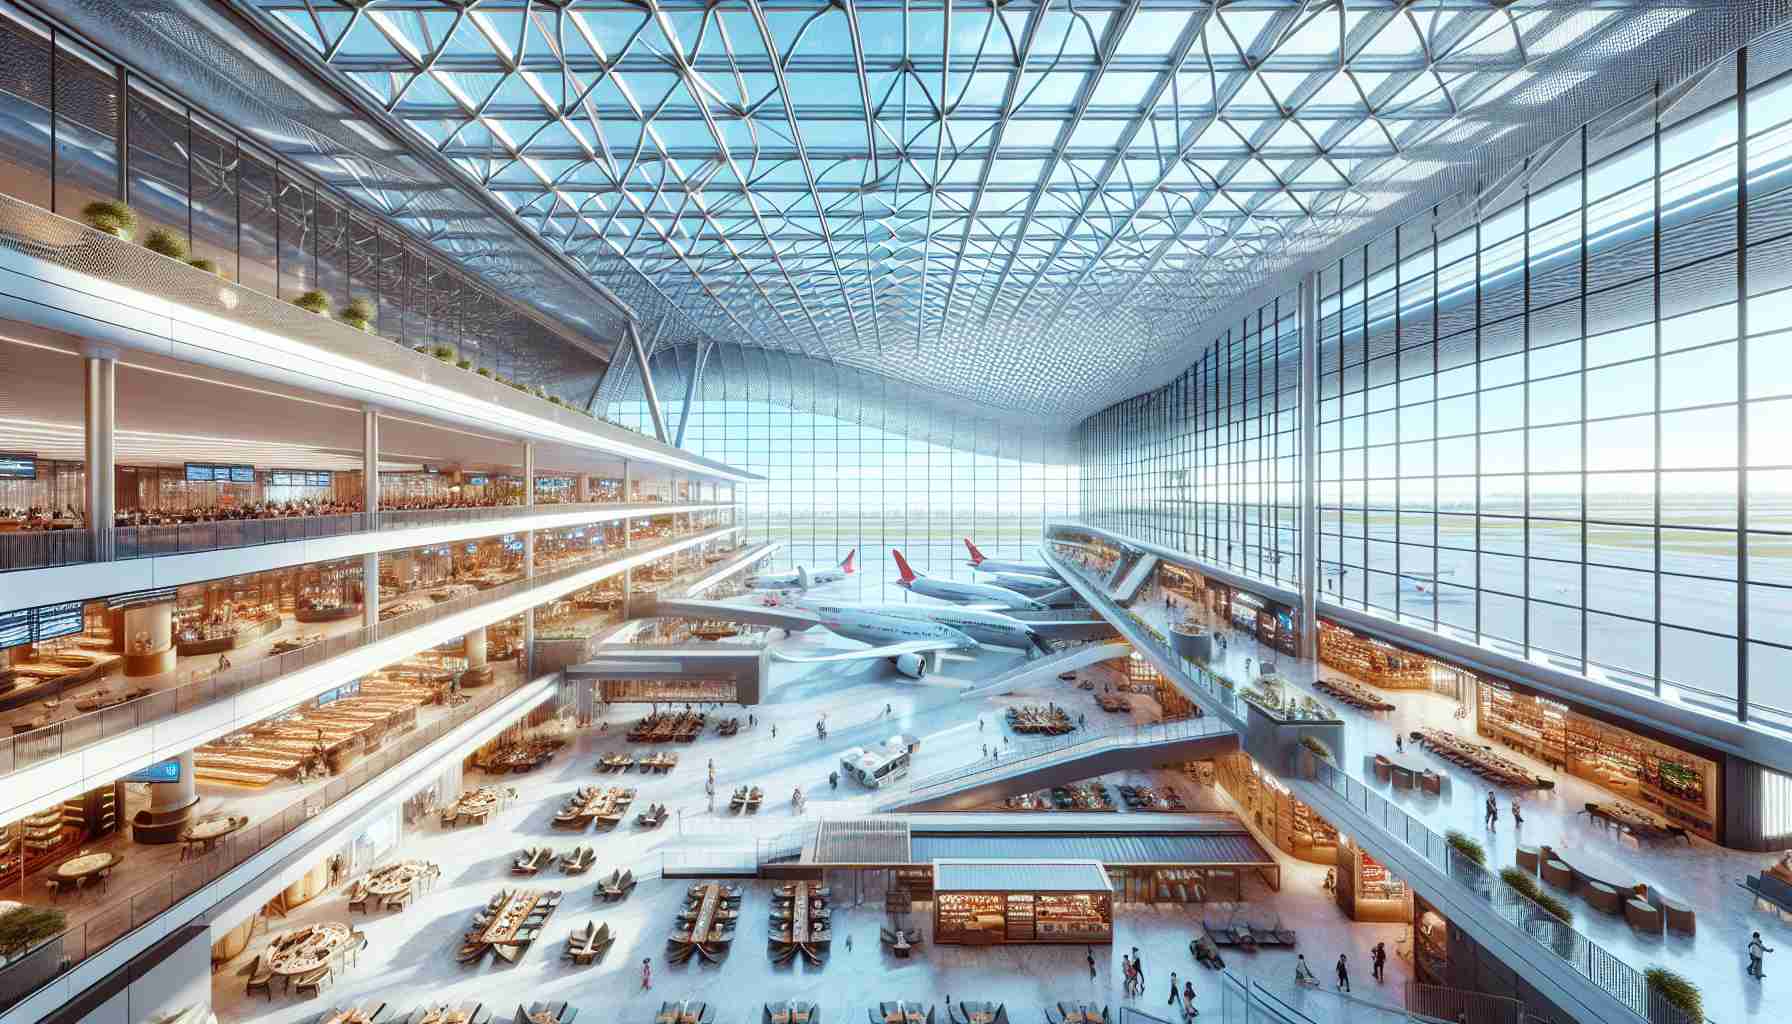 Generate a highly detailed, realistic image of an unparalleled airport experience under the theme 'The Sky's the Limit'. The scene should feature a state-of-the-art terminal with multiple levels, well-designed lounges, cutting-edge retail shops, and a diverse collection of restaurants catering to various cuisines from around the world. The airport's extensive glass facade should allow a clear view of the bustling runways where modern airplanes of various sizes are ready for departure. The environment should be filled with passengers of different descents and genders, each engaged in different activities, thus reflecting the  diversity of global travelers.